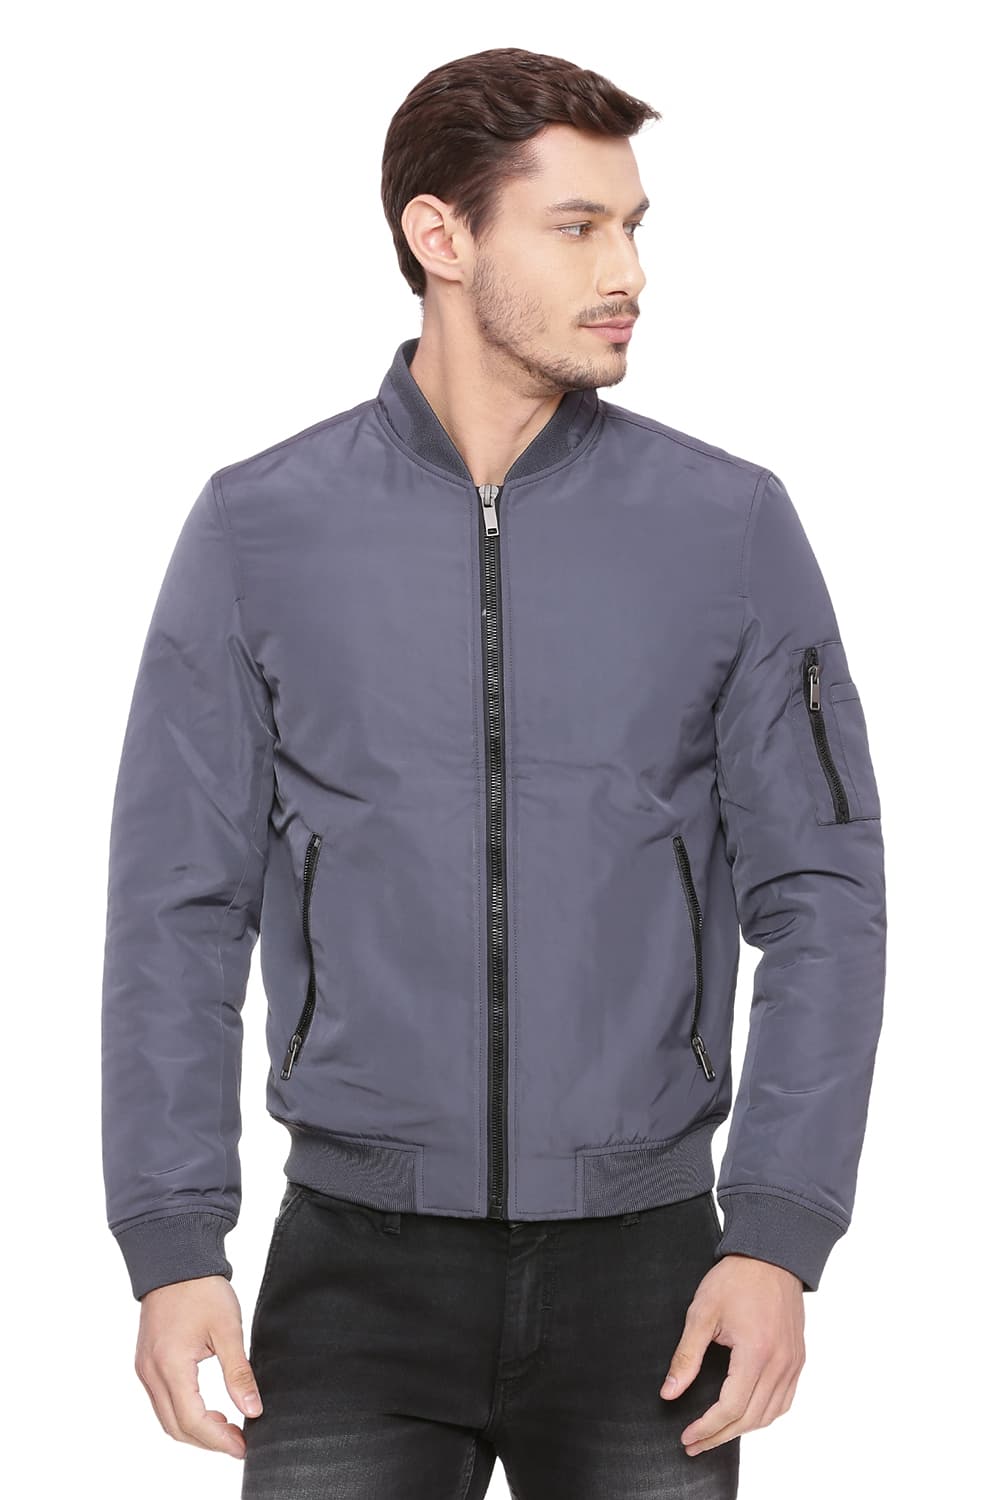 BASICS COMFORT FIT QUILTED POLY FILL JACKET